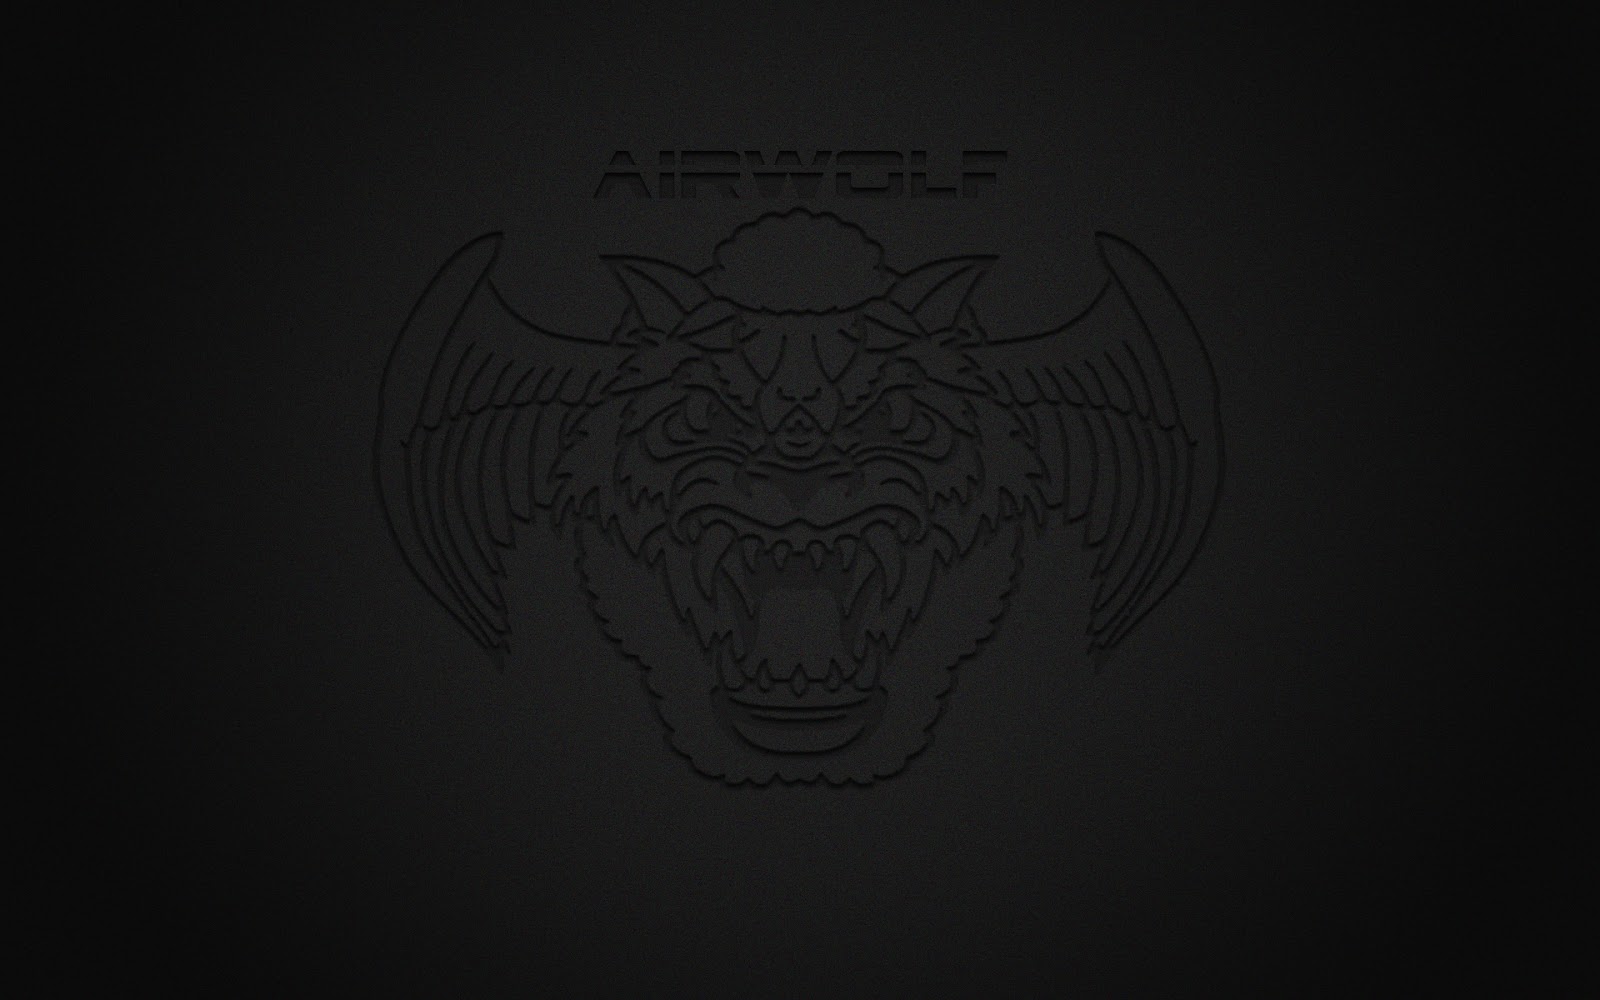 Airwolf Logo Wallpaper Submited Image